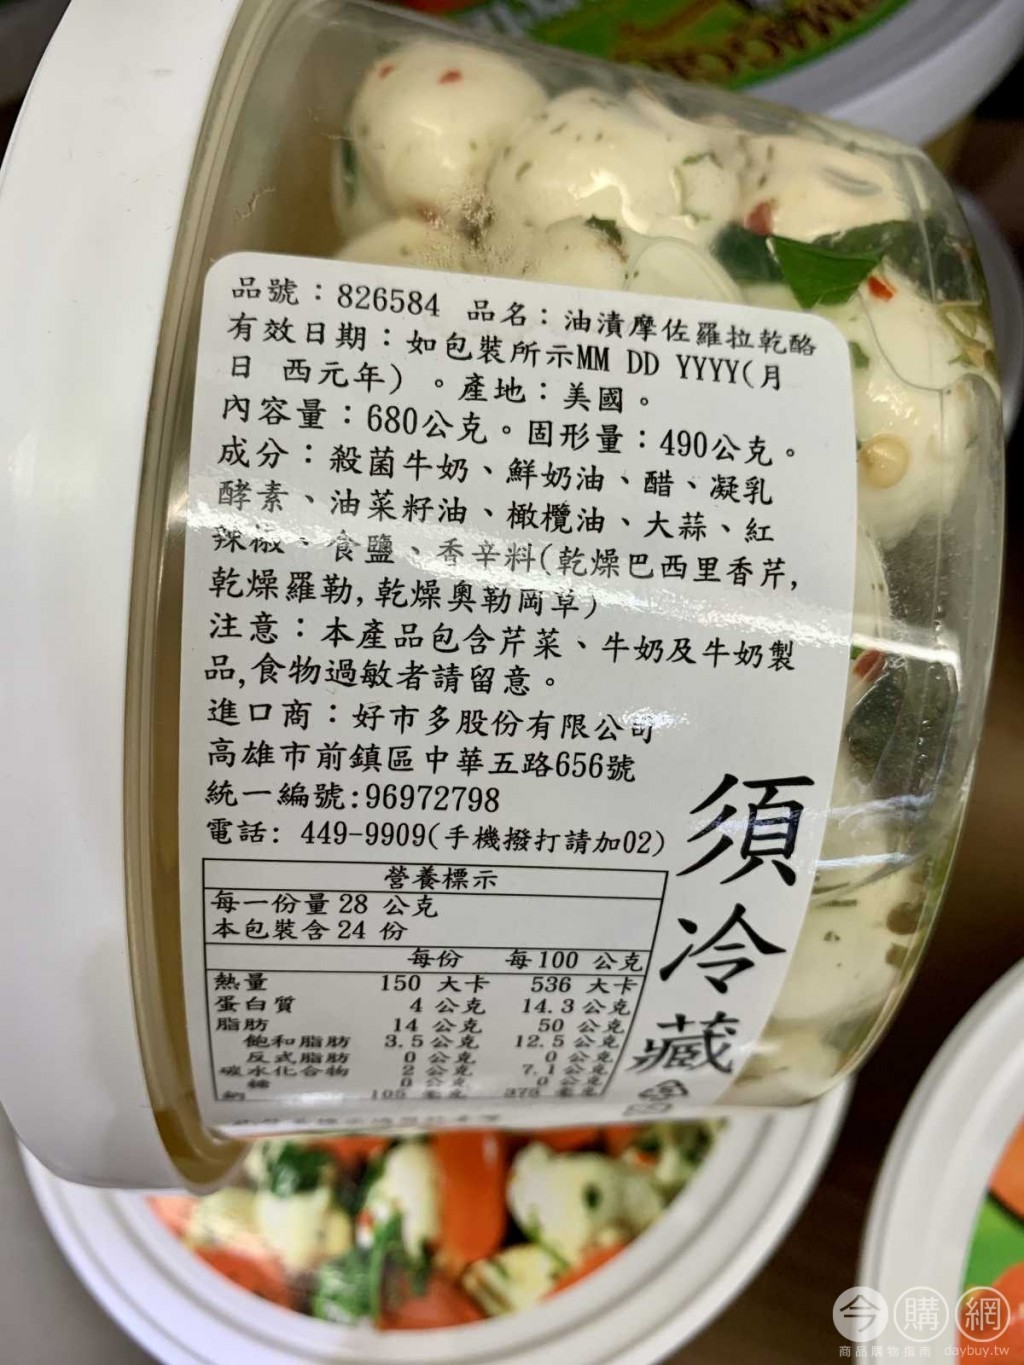 Costco Taiwan to cover medical costs for consumers of contaminated cheese